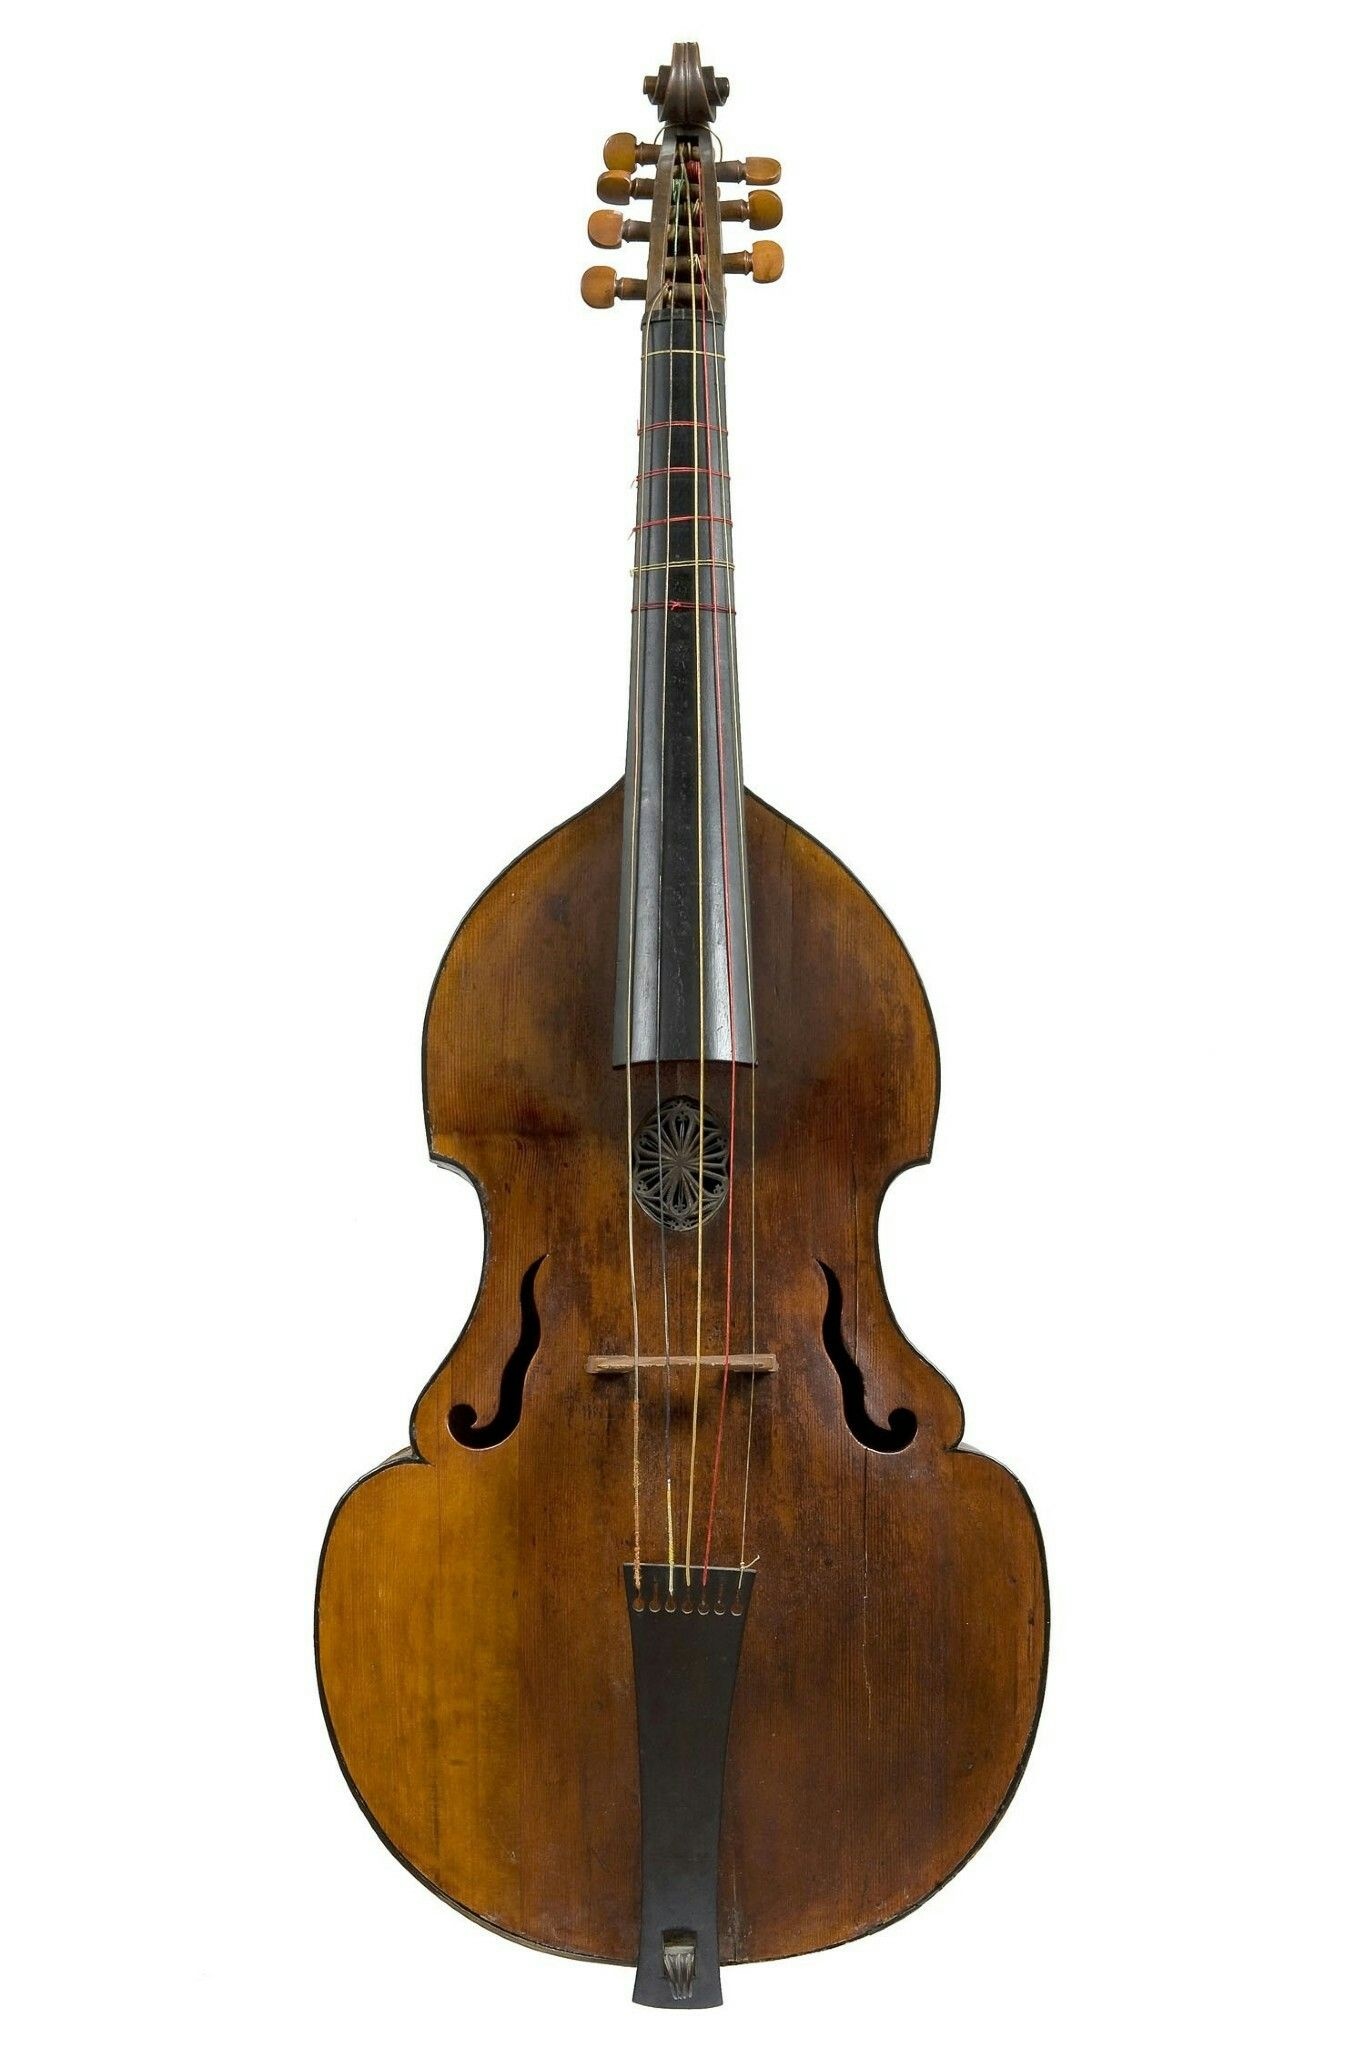 Viola da Gamba: Bass Viol, First Appeared In Spain In The Mid-To-Late 15th Century, Widely Popular In The Renaissance And Baroque Periods, 1700, Nurnberg. 1370x2050 HD Wallpaper.